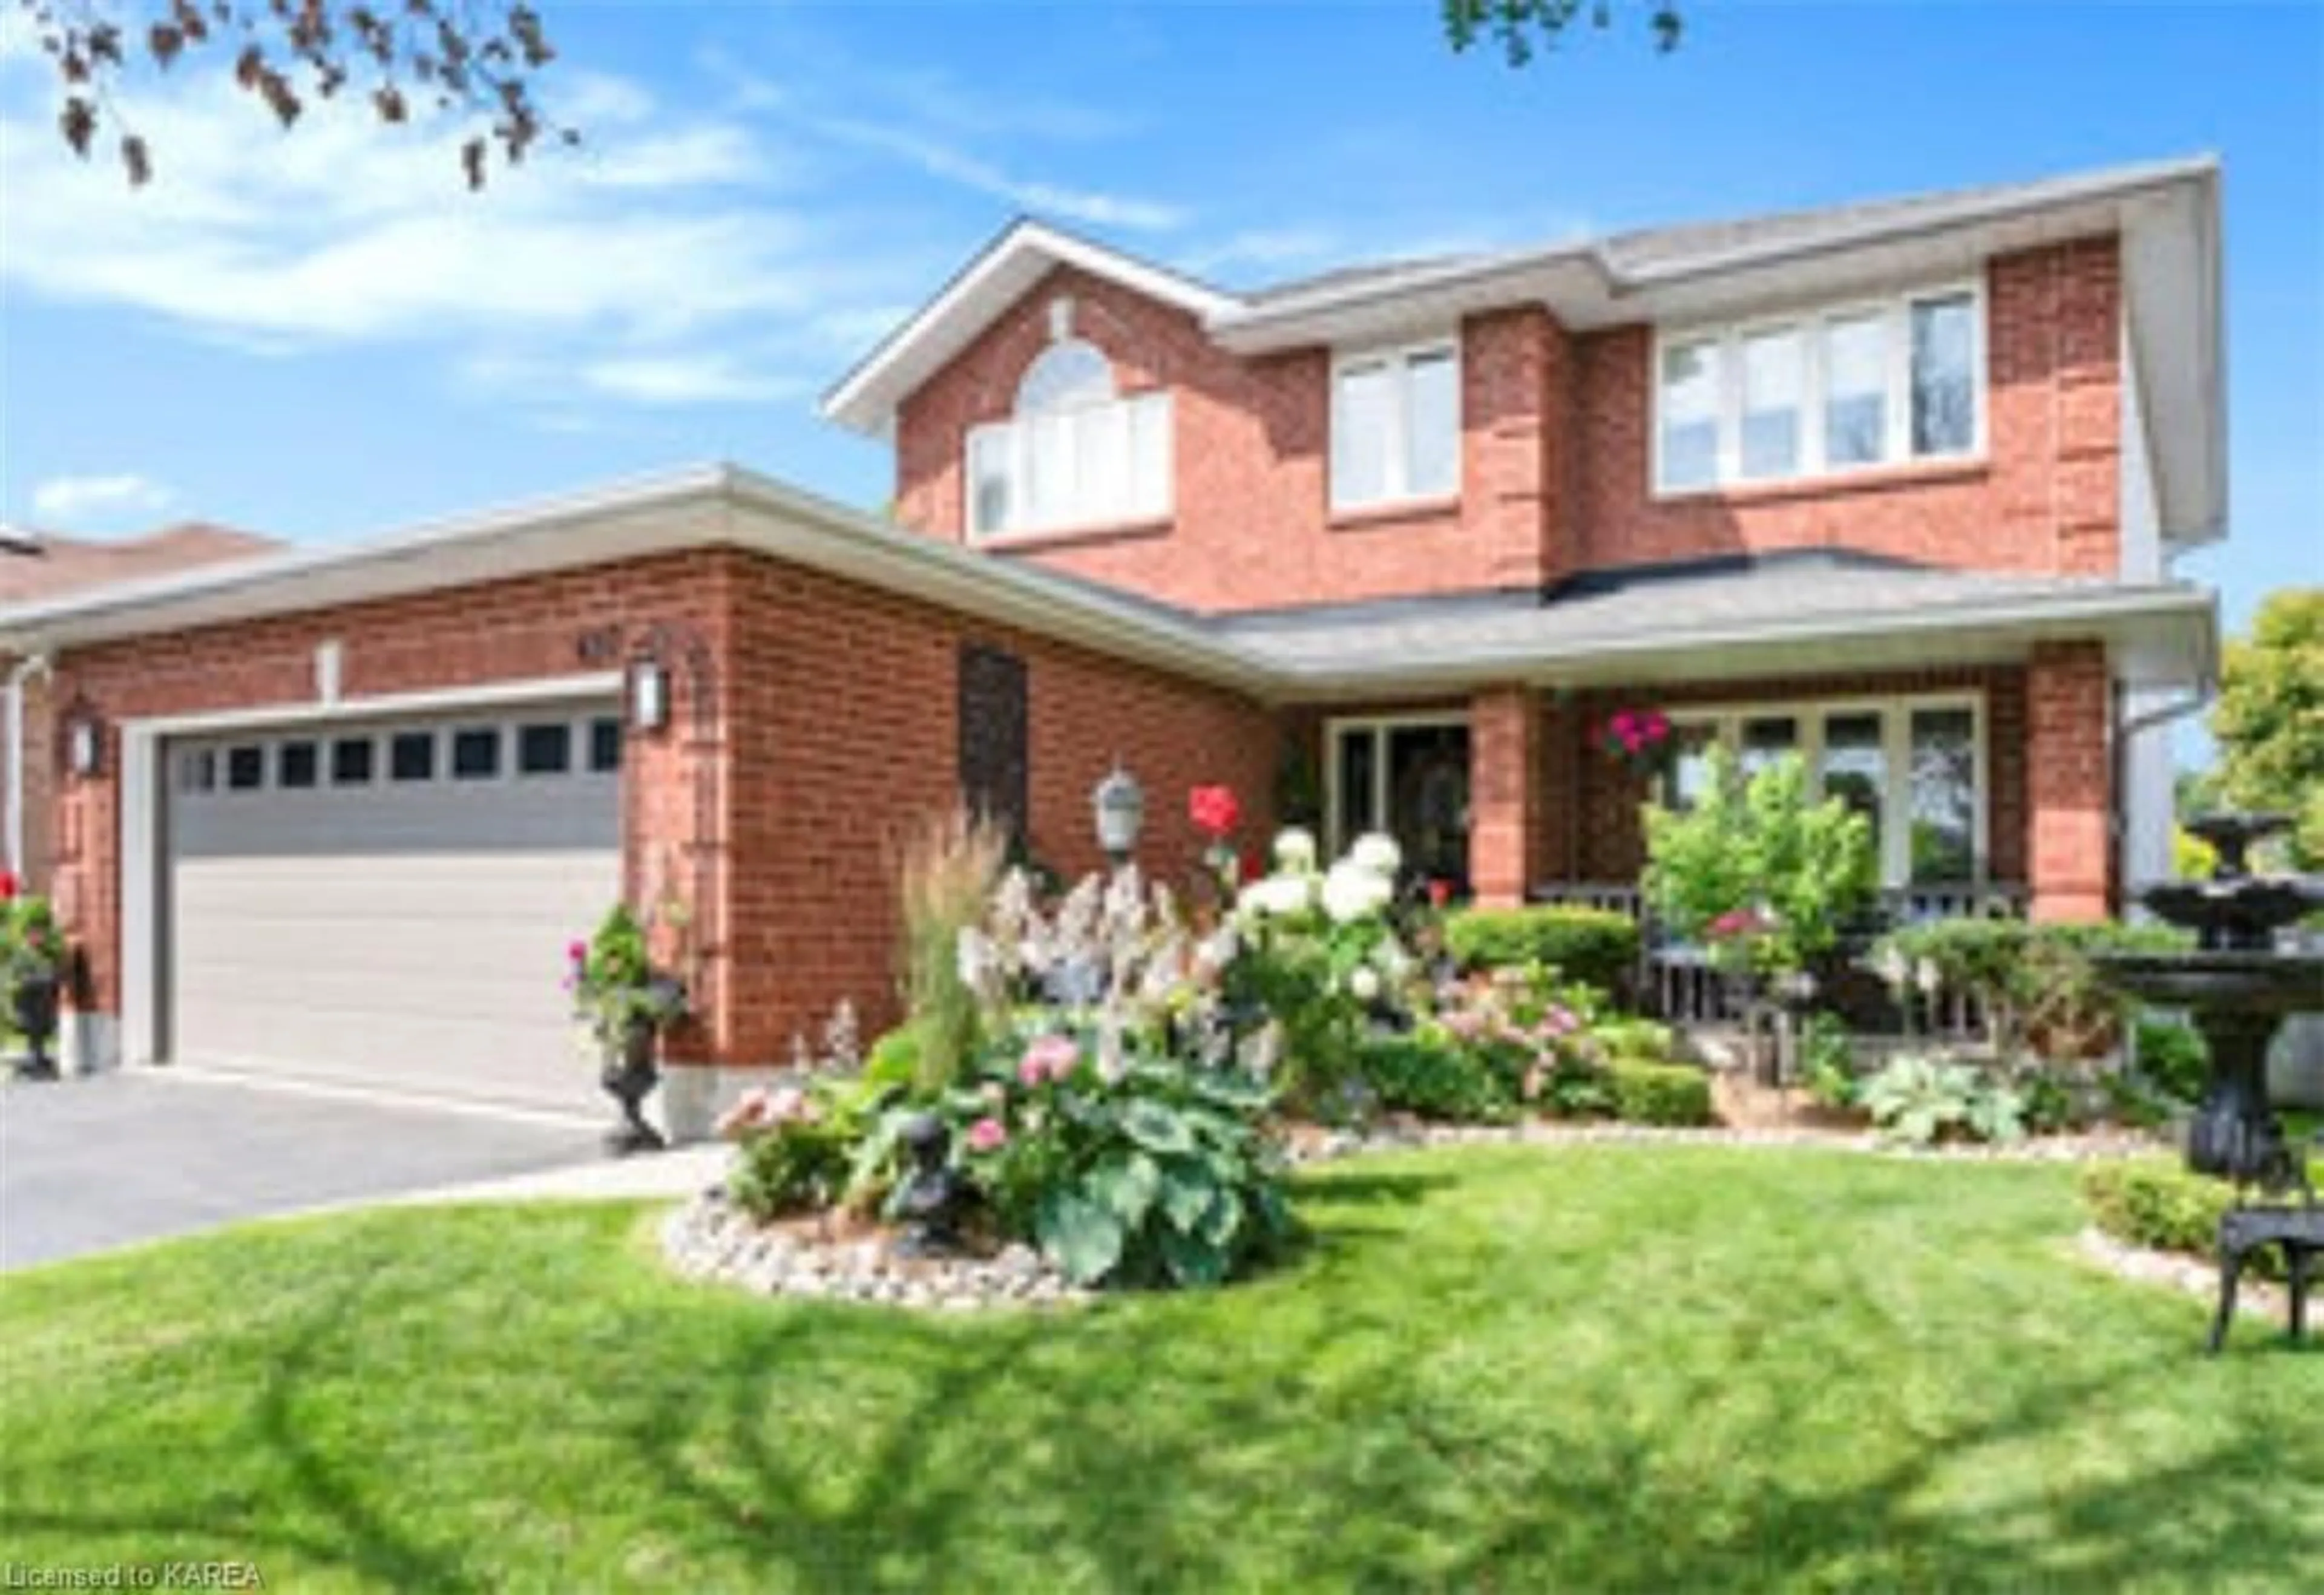 Home with brick exterior material for 497 Citation Cres, Kingston Ontario K7M 8W2